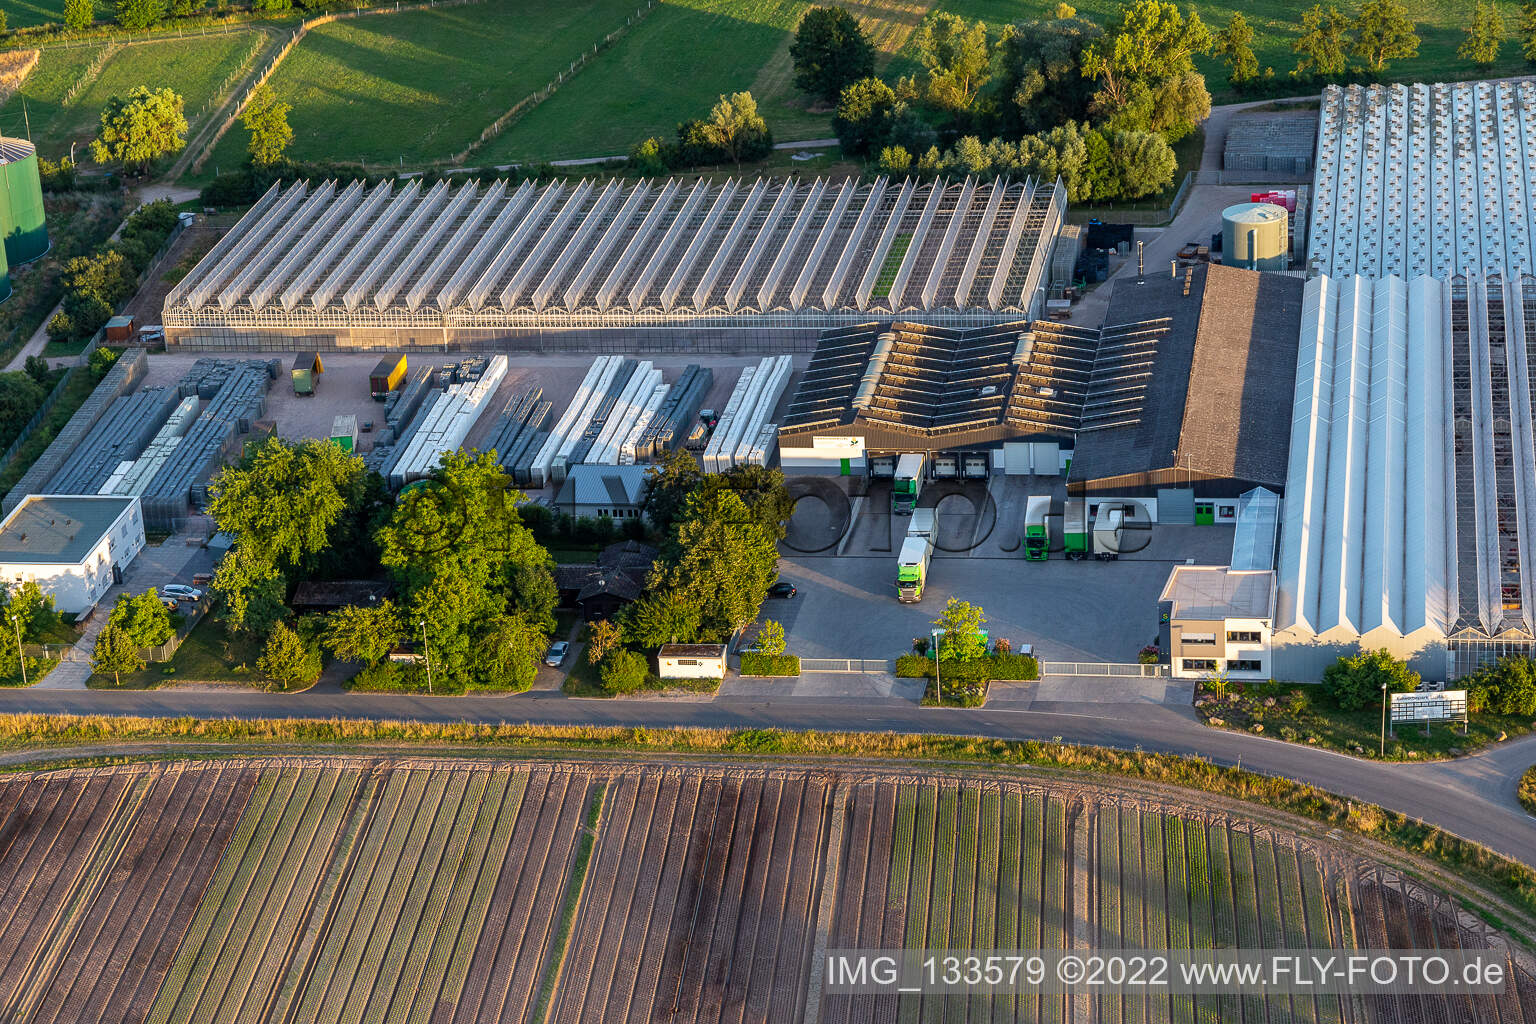 Rudolf Sinn Jungpflanzen GmbH & Co. KG in Lustadt in the state Rhineland-Palatinate, Germany from above